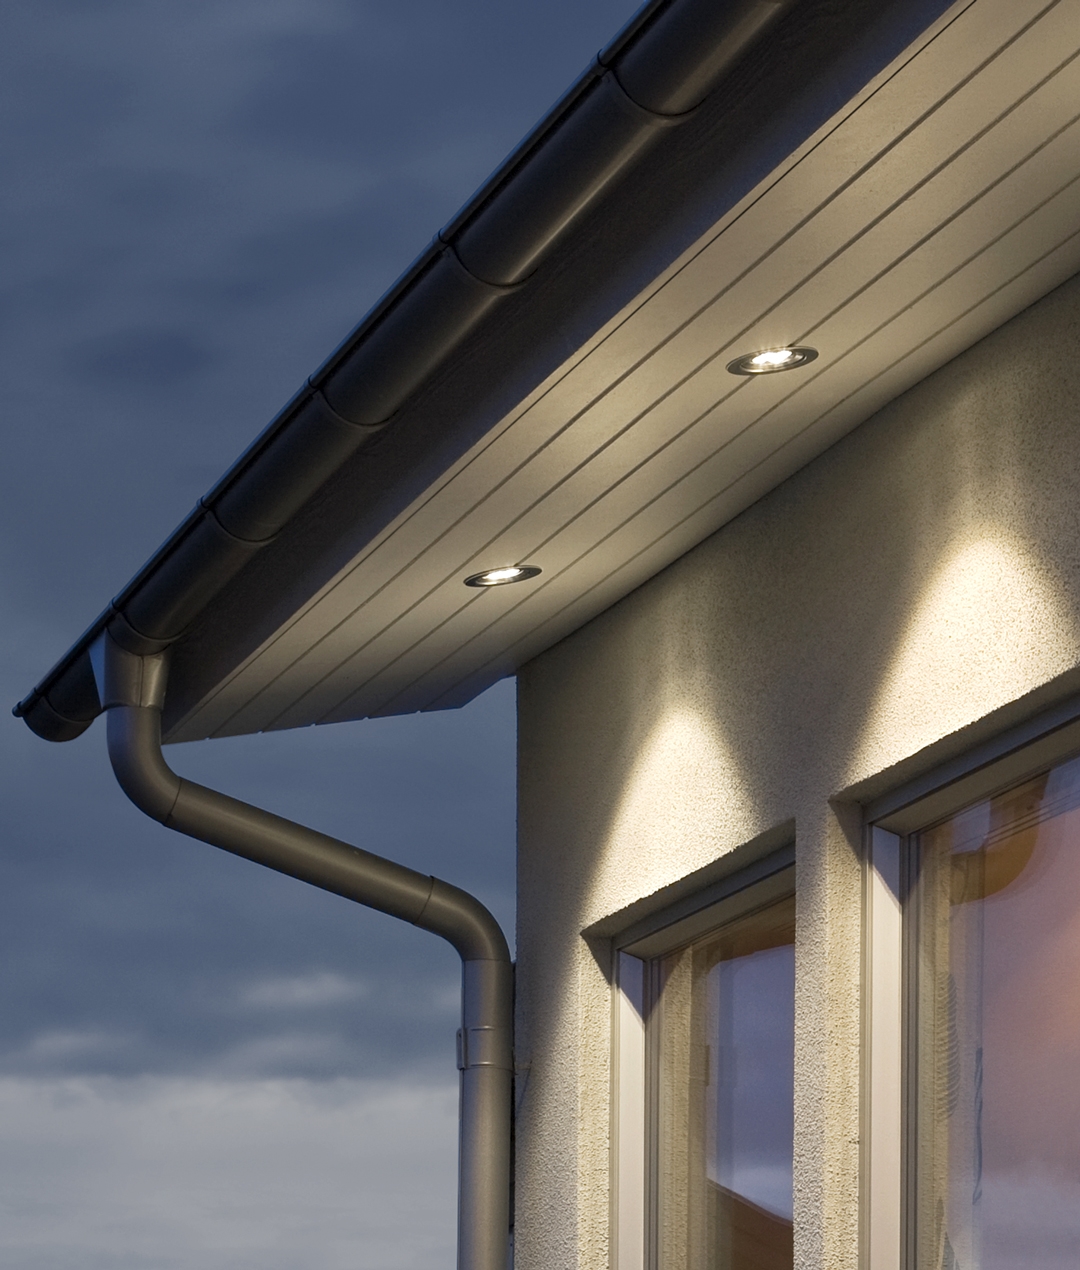 Recessed LED Soffit Light in Aluminium - IP44 to Wash Walls Below Roofline